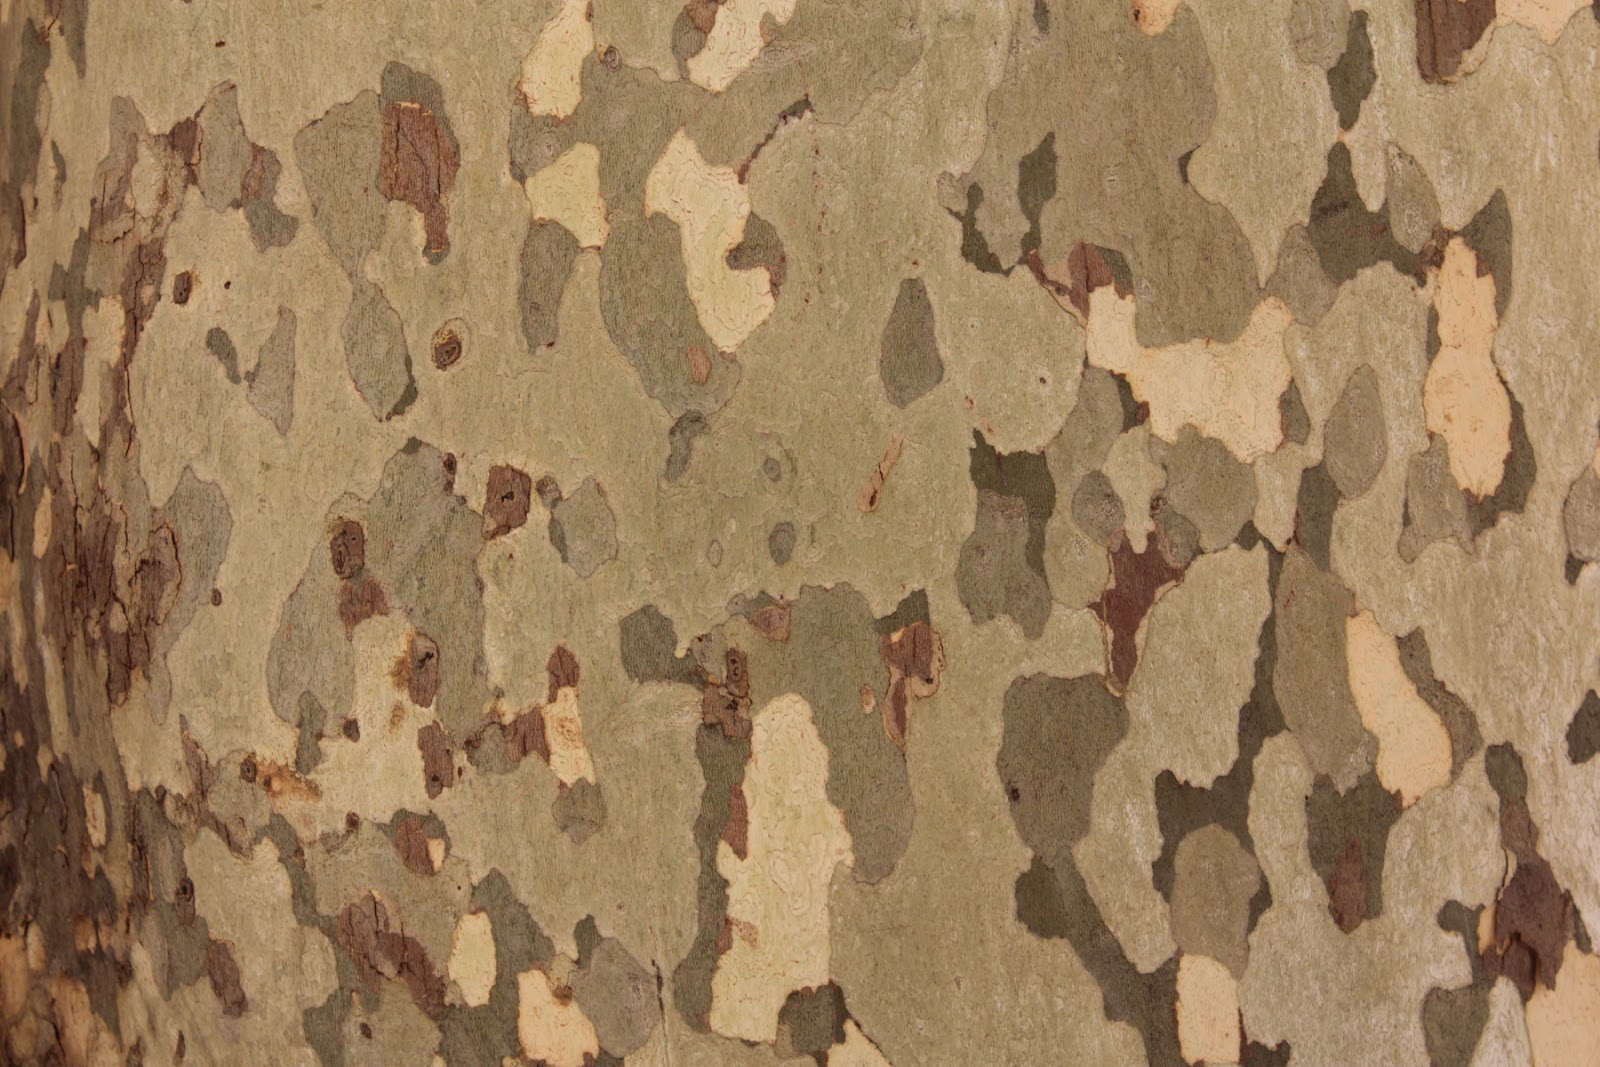 Cool Camouflage pattern on a tree bark